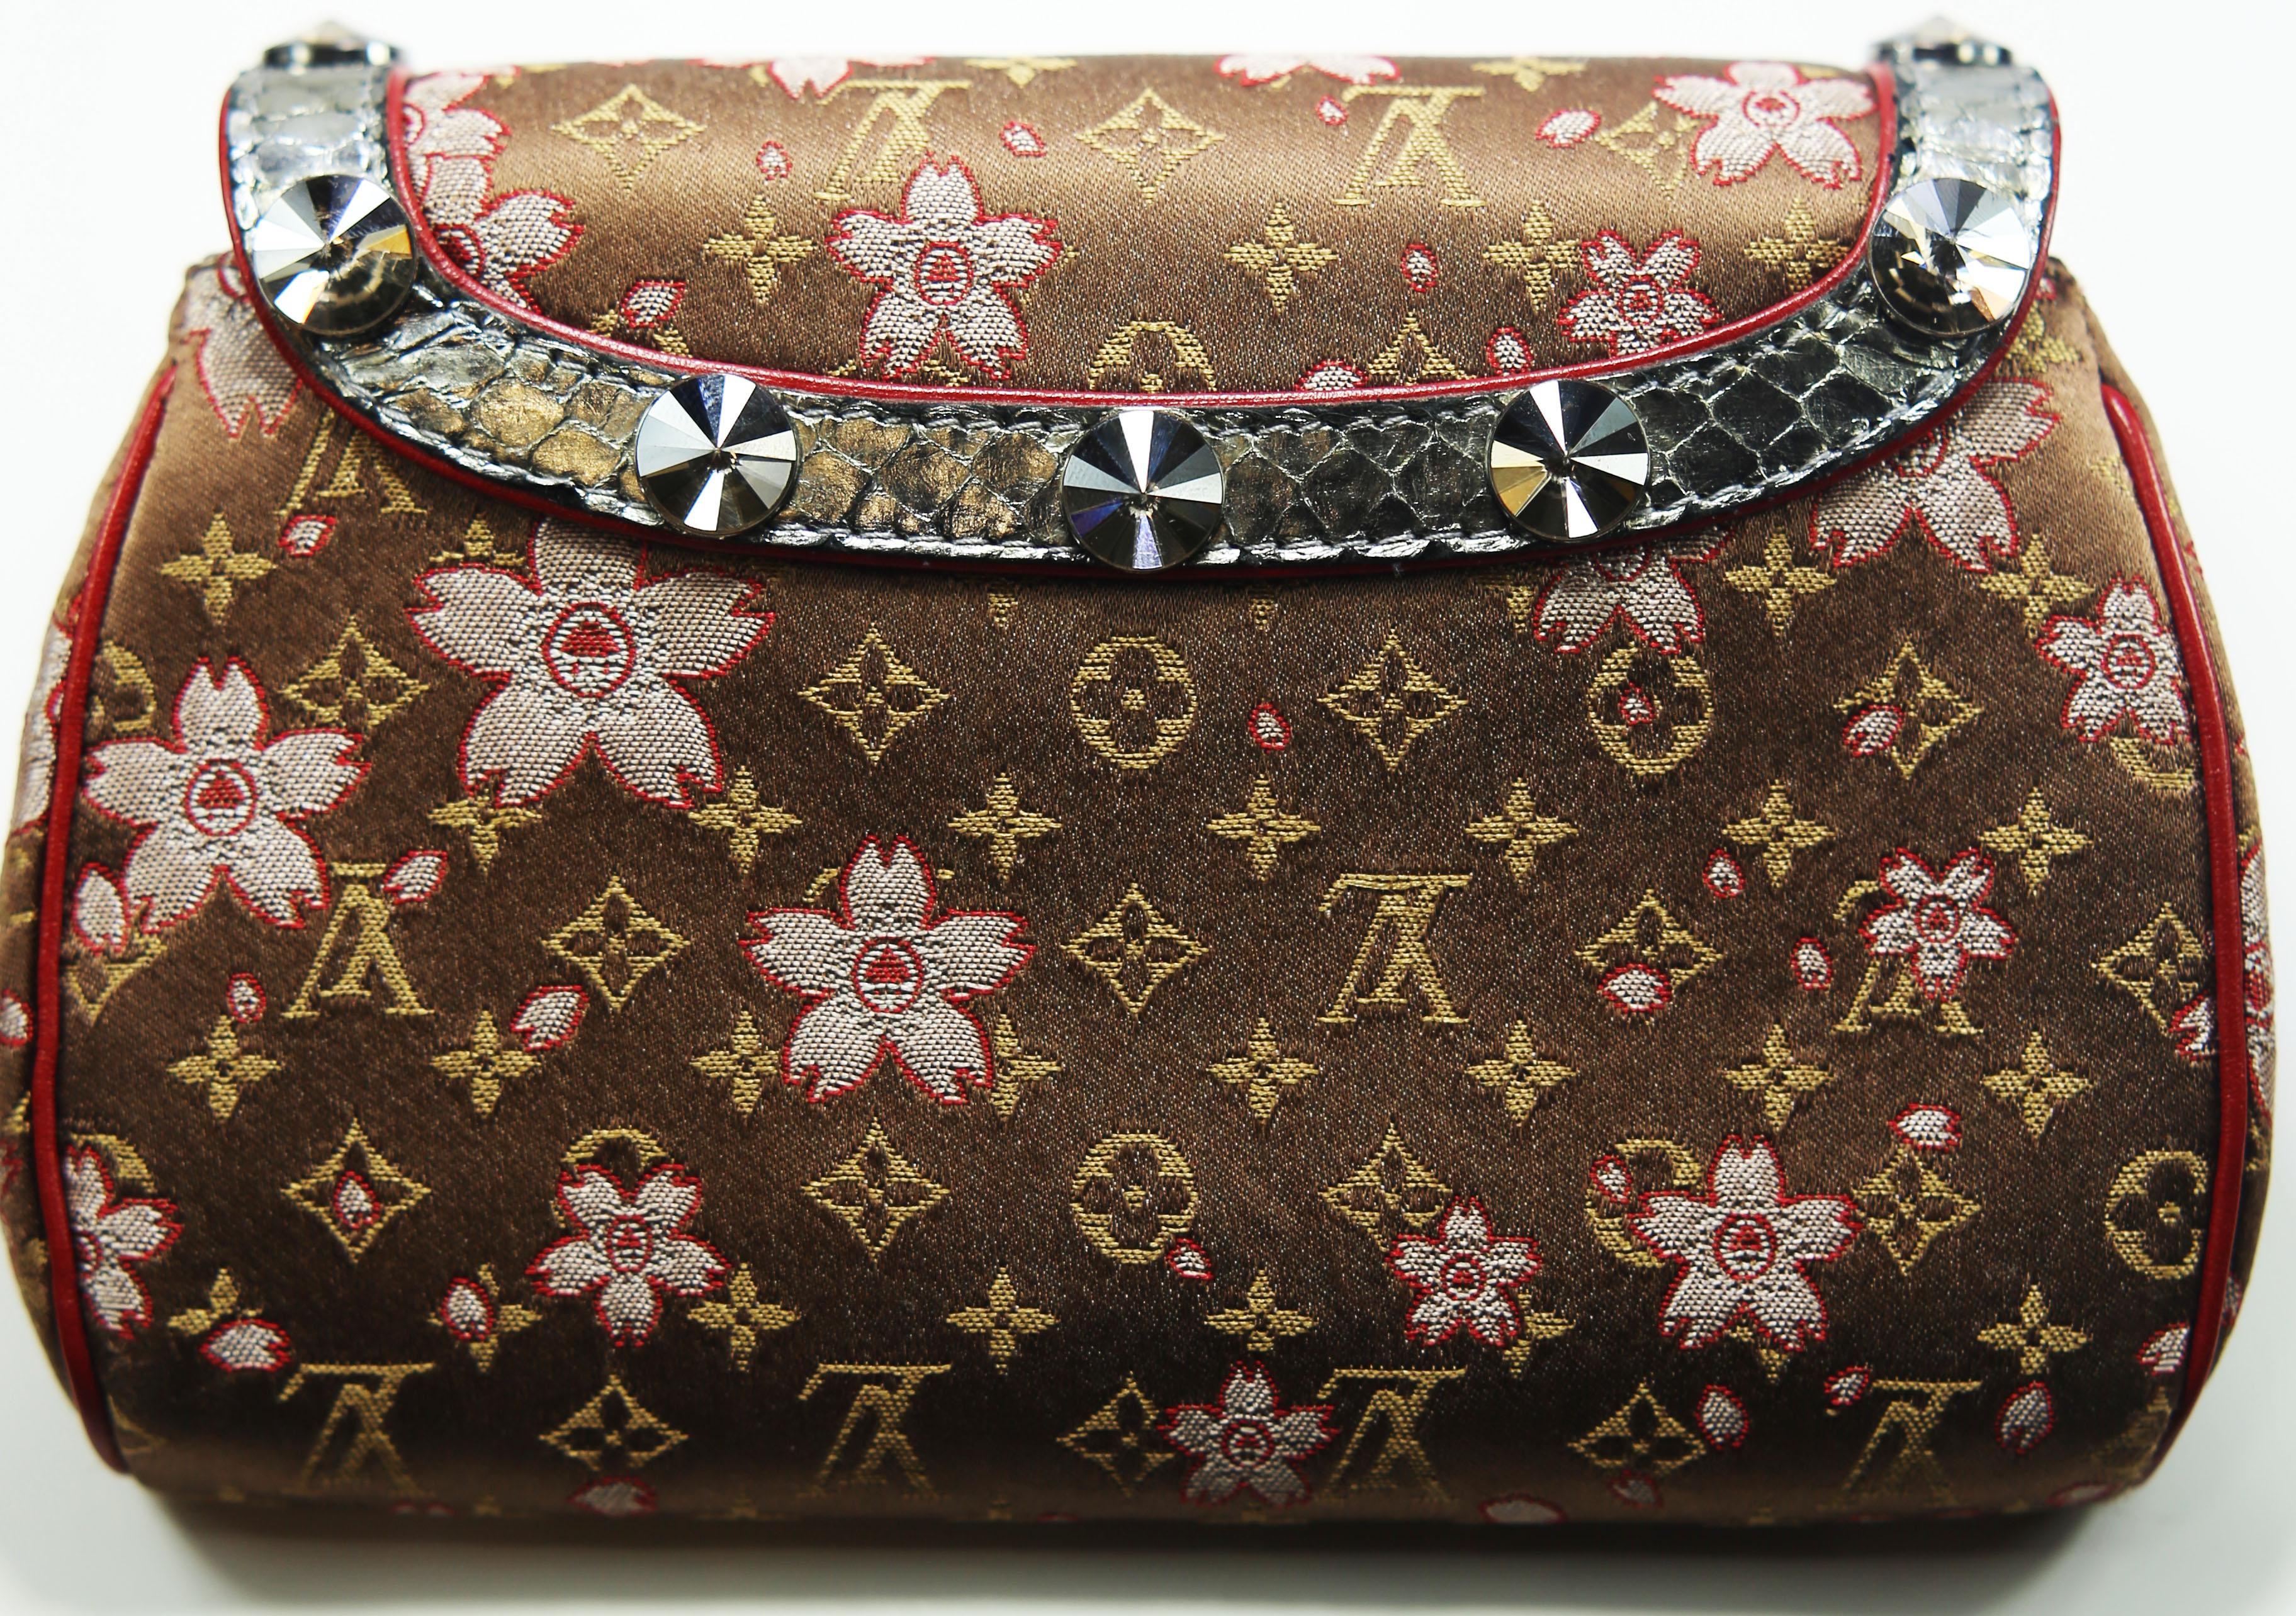 Louis Vuitton Takashi Murakami Monogram Satin Cherry Blossom Evening Purse
Made In: France 
Color: Red Bourdeaux
Materials: Leather
Closure/Opening: Slip-on
Overall Condition: Very good pre-owned condition, restored soles, the hardware and the